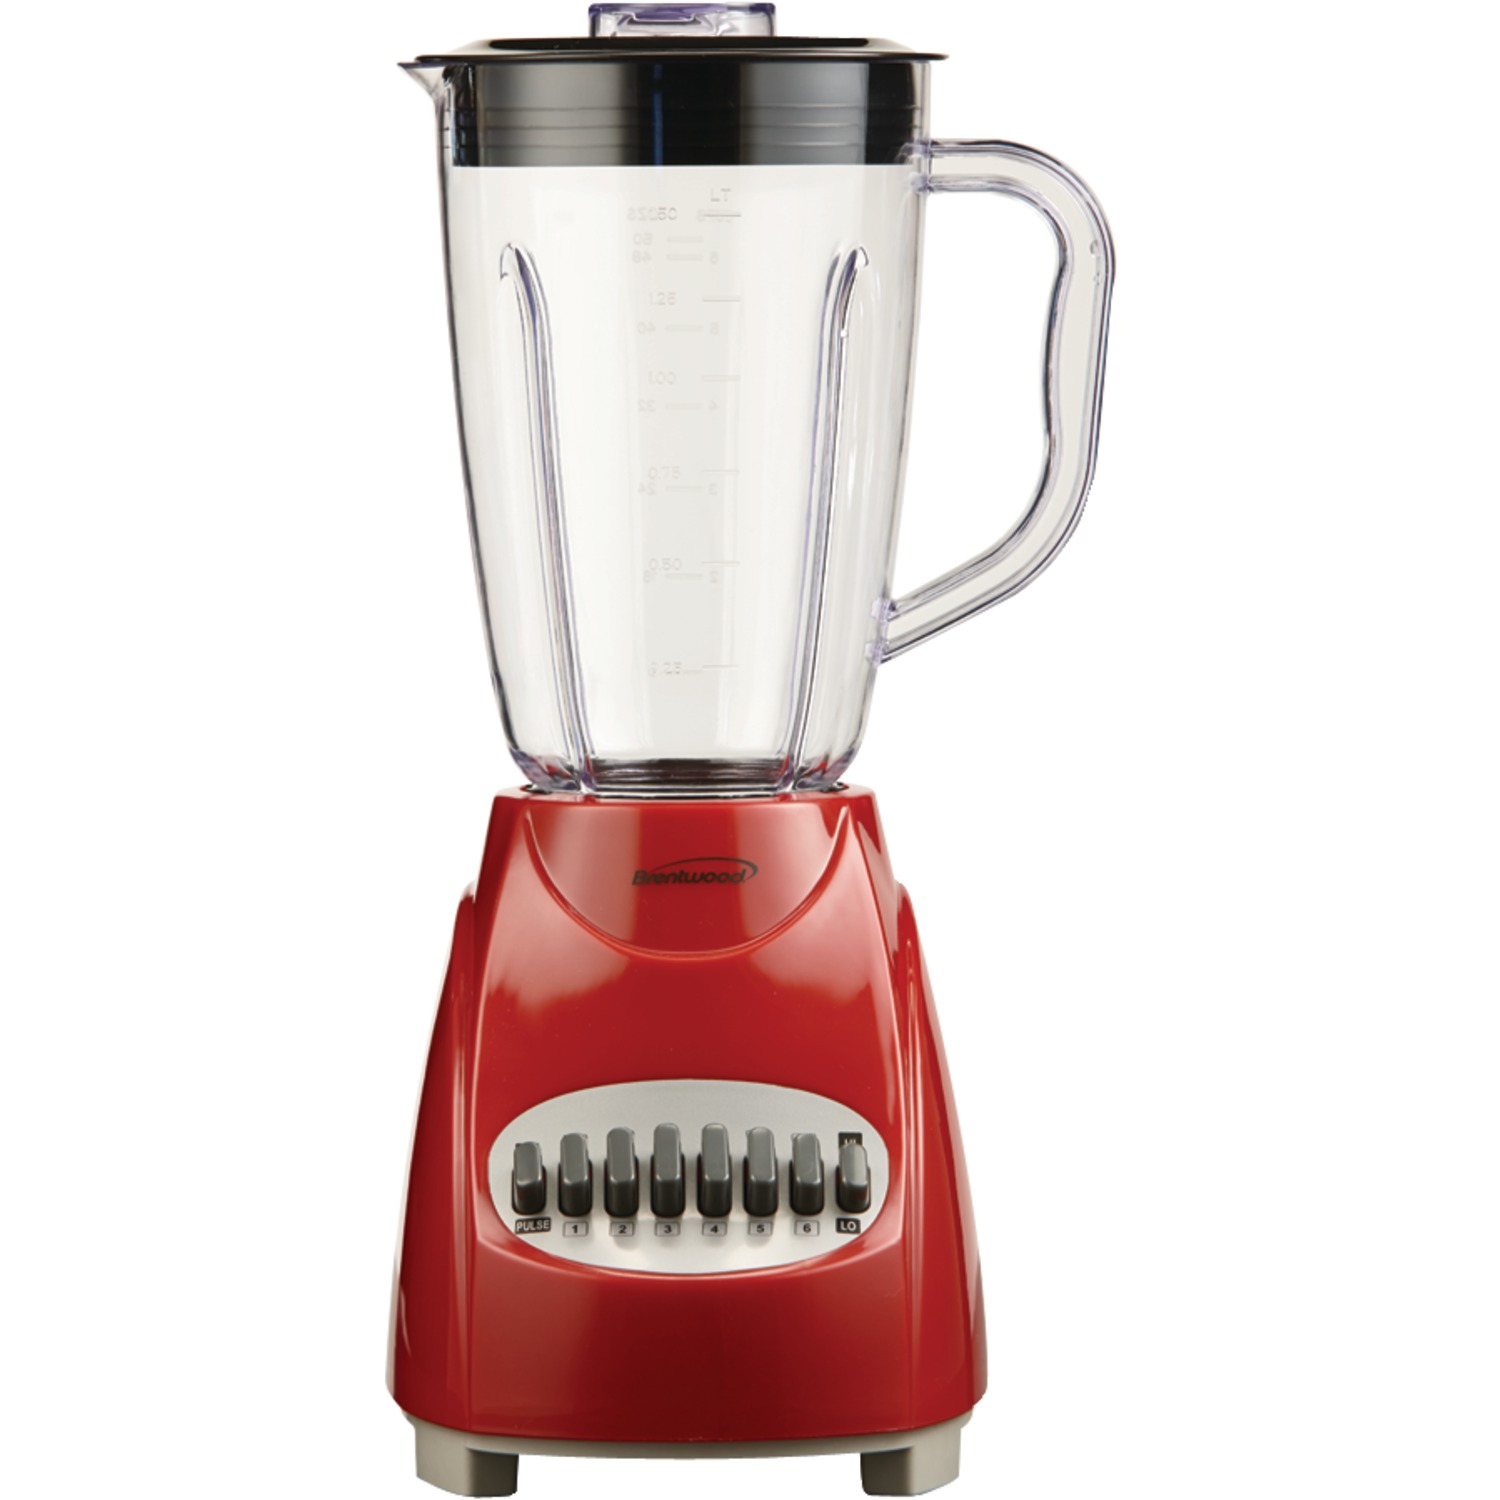 Brentwood Appliances Jb-220r 50-ounce 12-speed + Pulse Electric Blender with Plastic Jar (red) - image 1 of 12